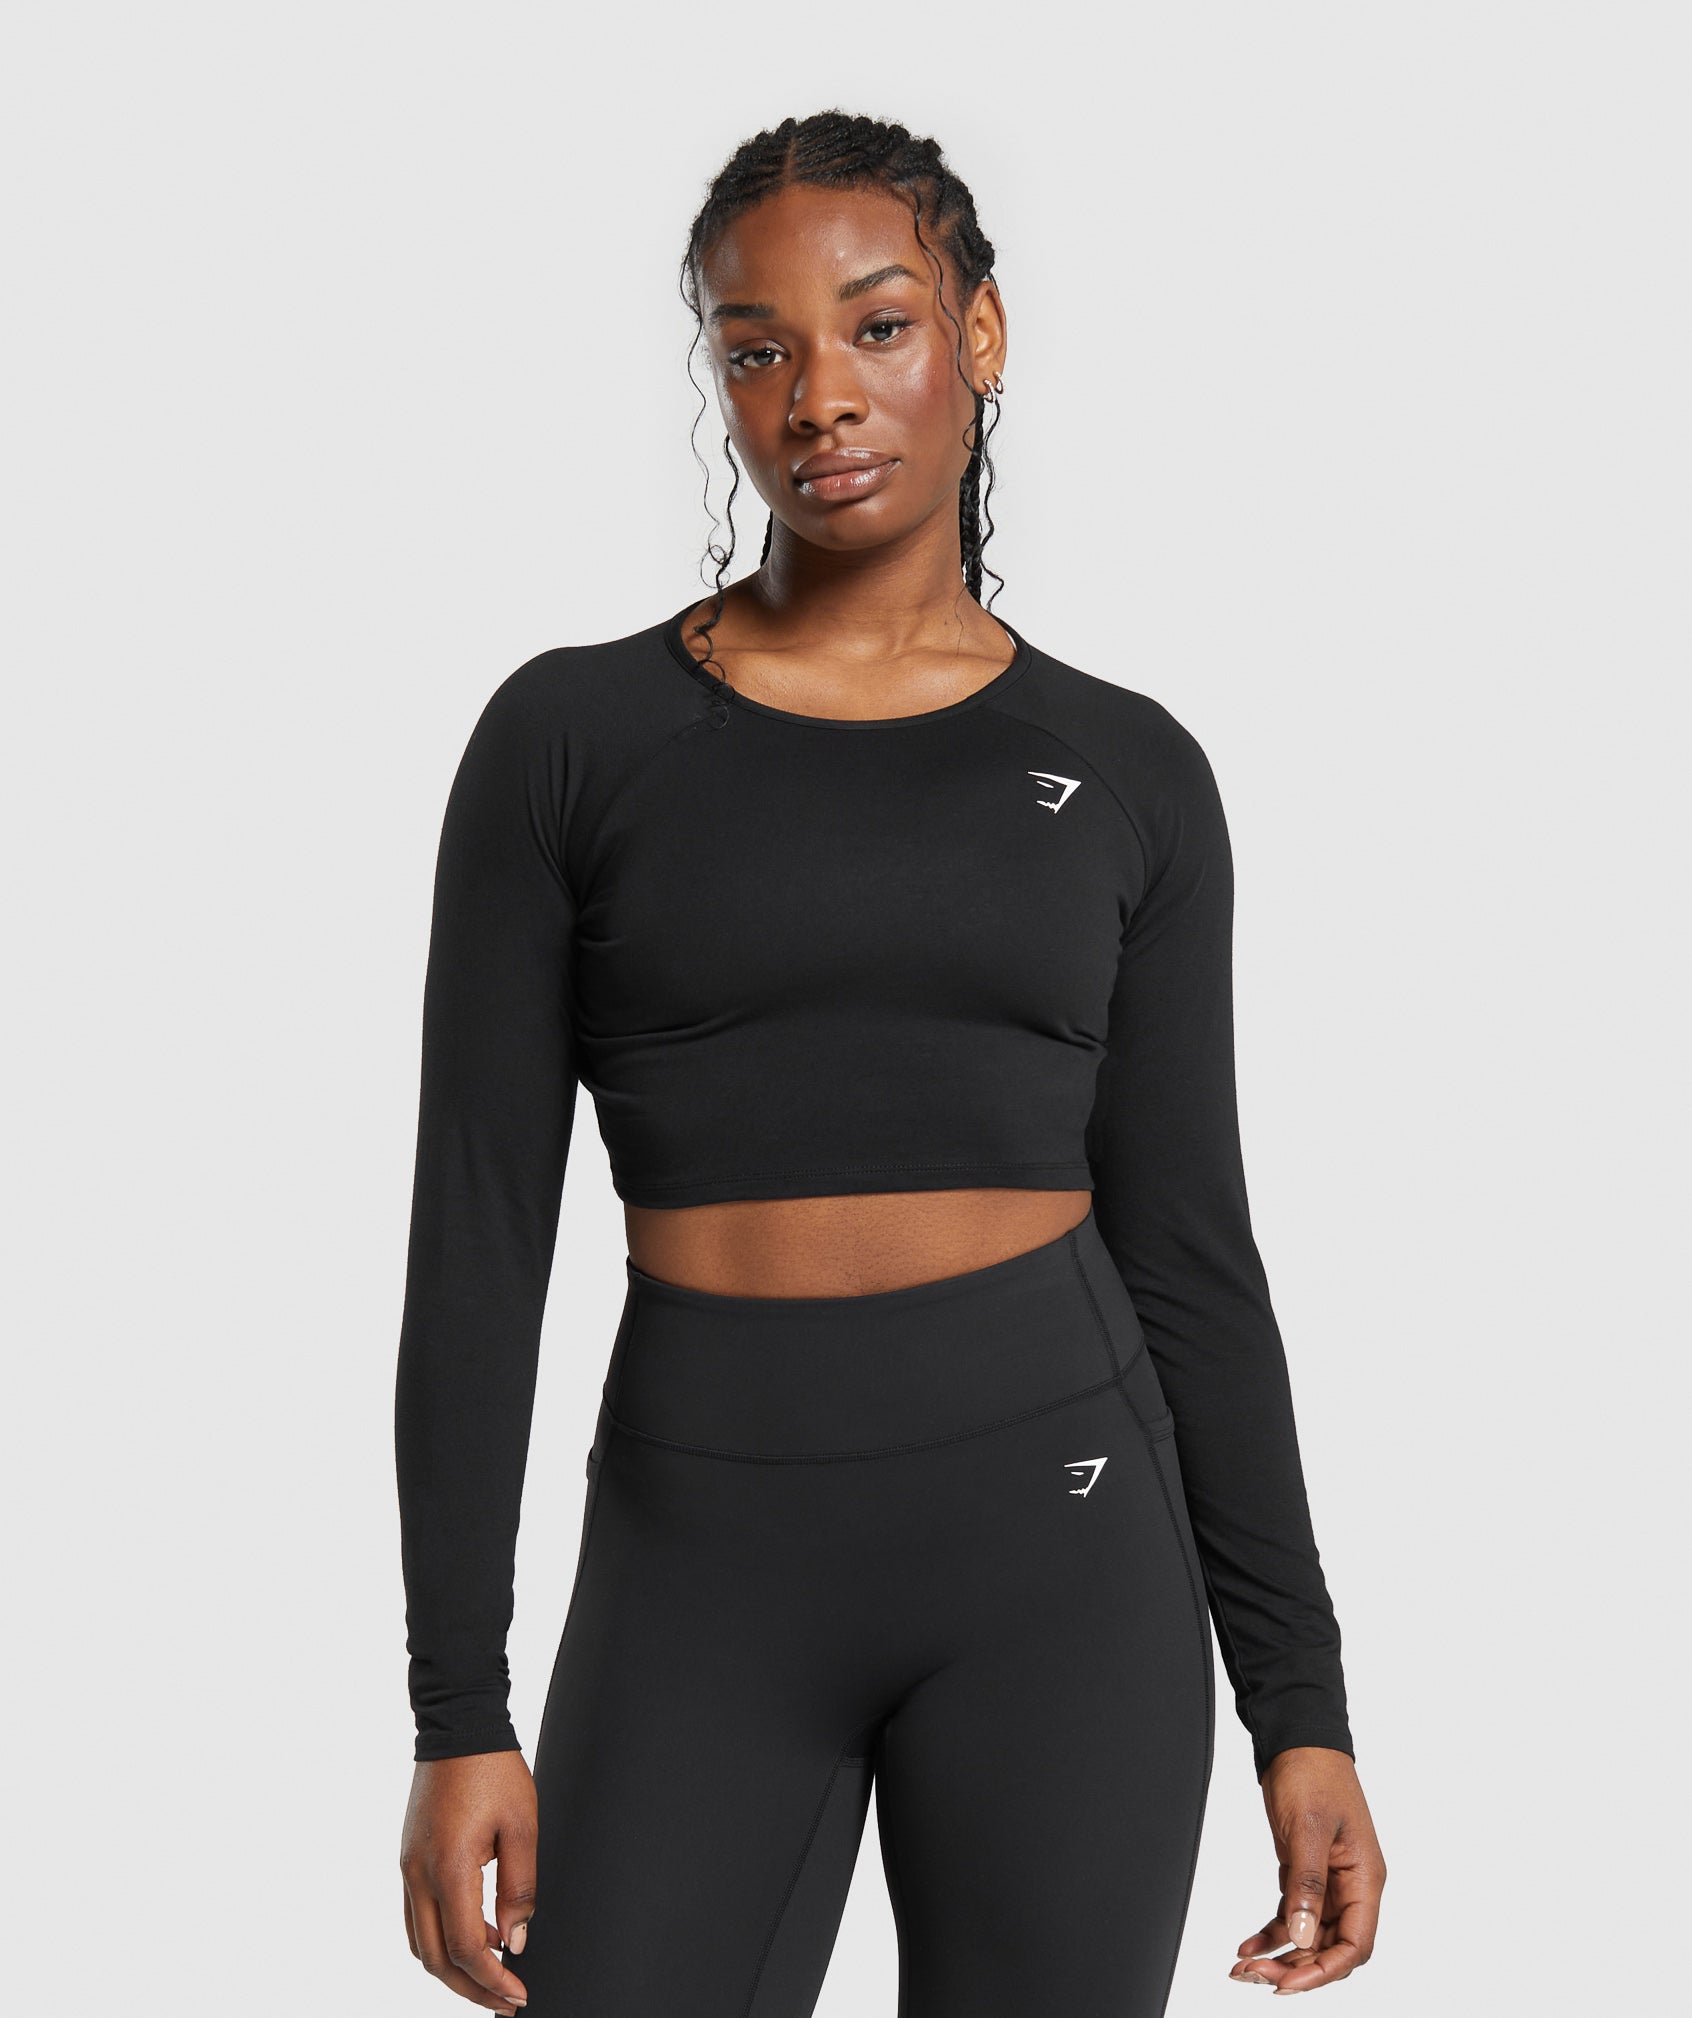 2-Pack Women's Cross Back Long Sleeve Crop Tops | Gym Yoga Athletic Shirts